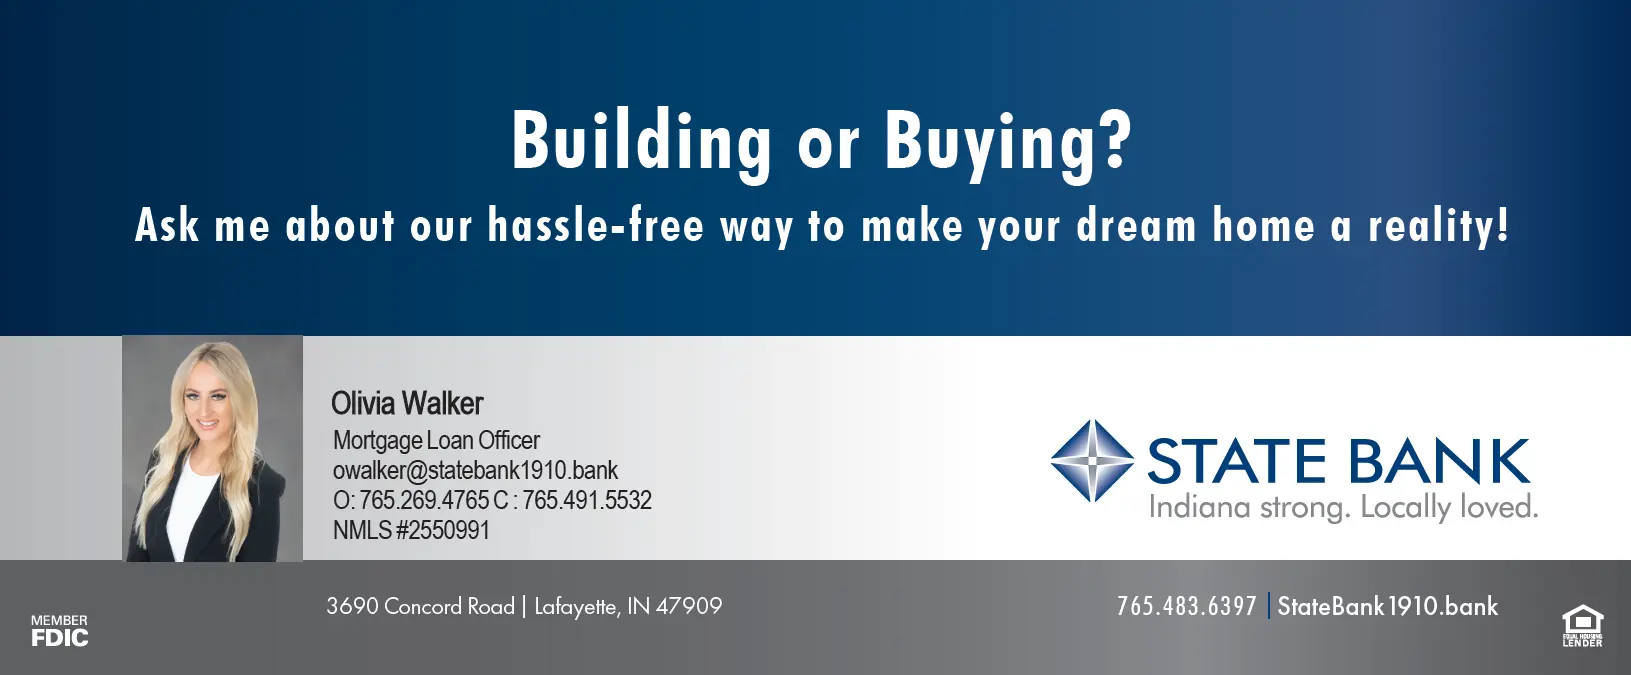 State Bank - Home Construction Loans